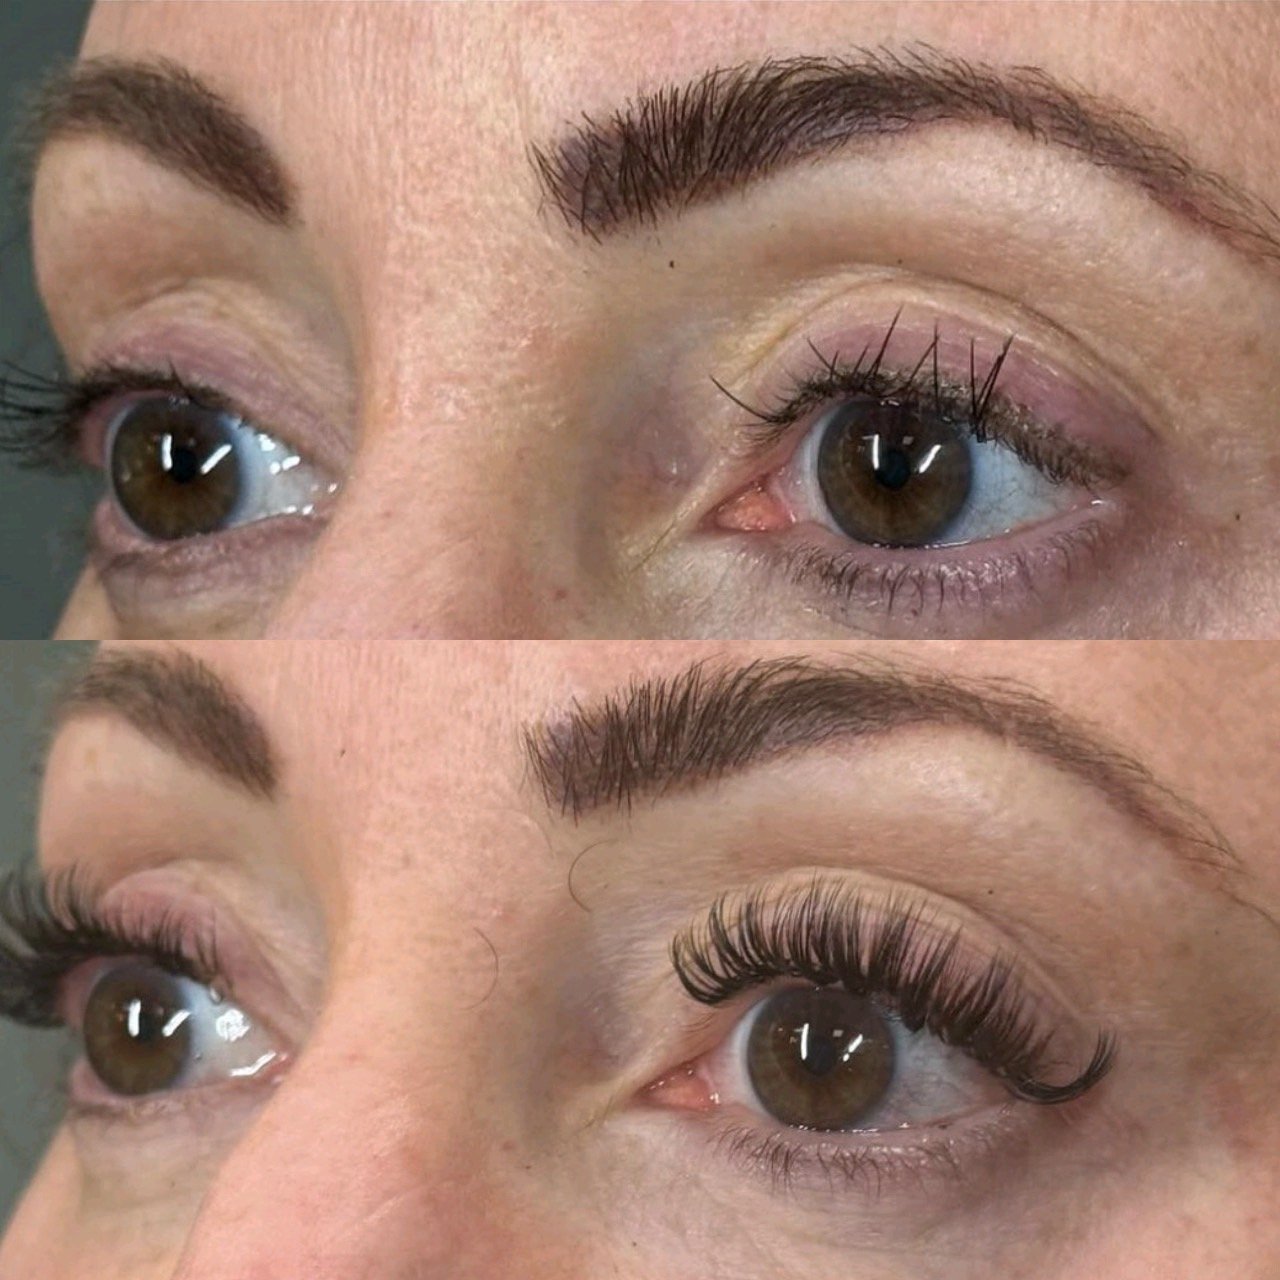 How stunning are these fully custom Lash Extensions by Kass? Did you know each set she creates is meticulously tailored to you, blending artistry with science? From facial measurements to lifestyle considerations she crafts a one-of-a-kind look that 